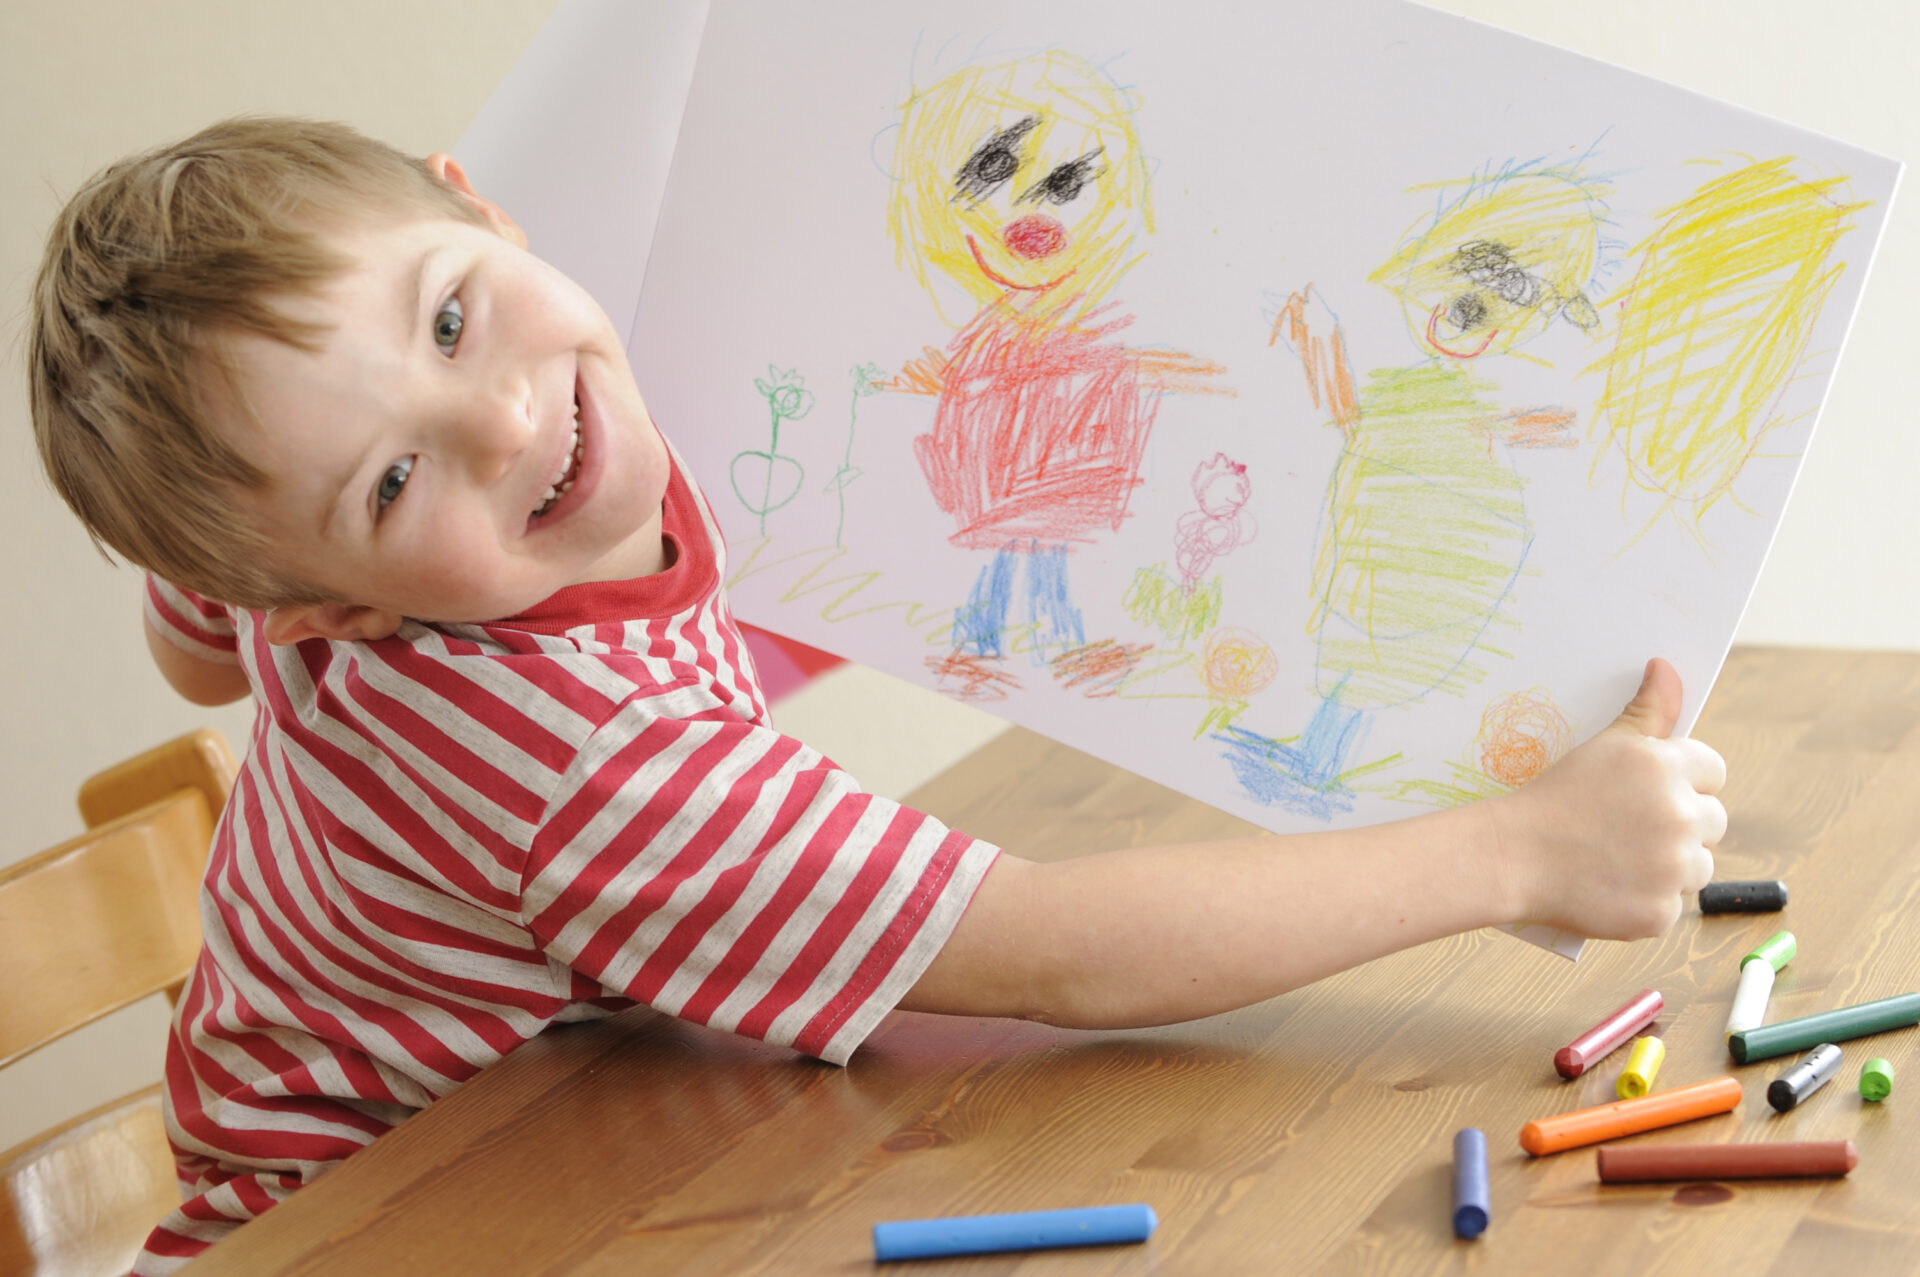 Seven year old boy with Down Syndrome shows his drawing. More photo's of this boy: